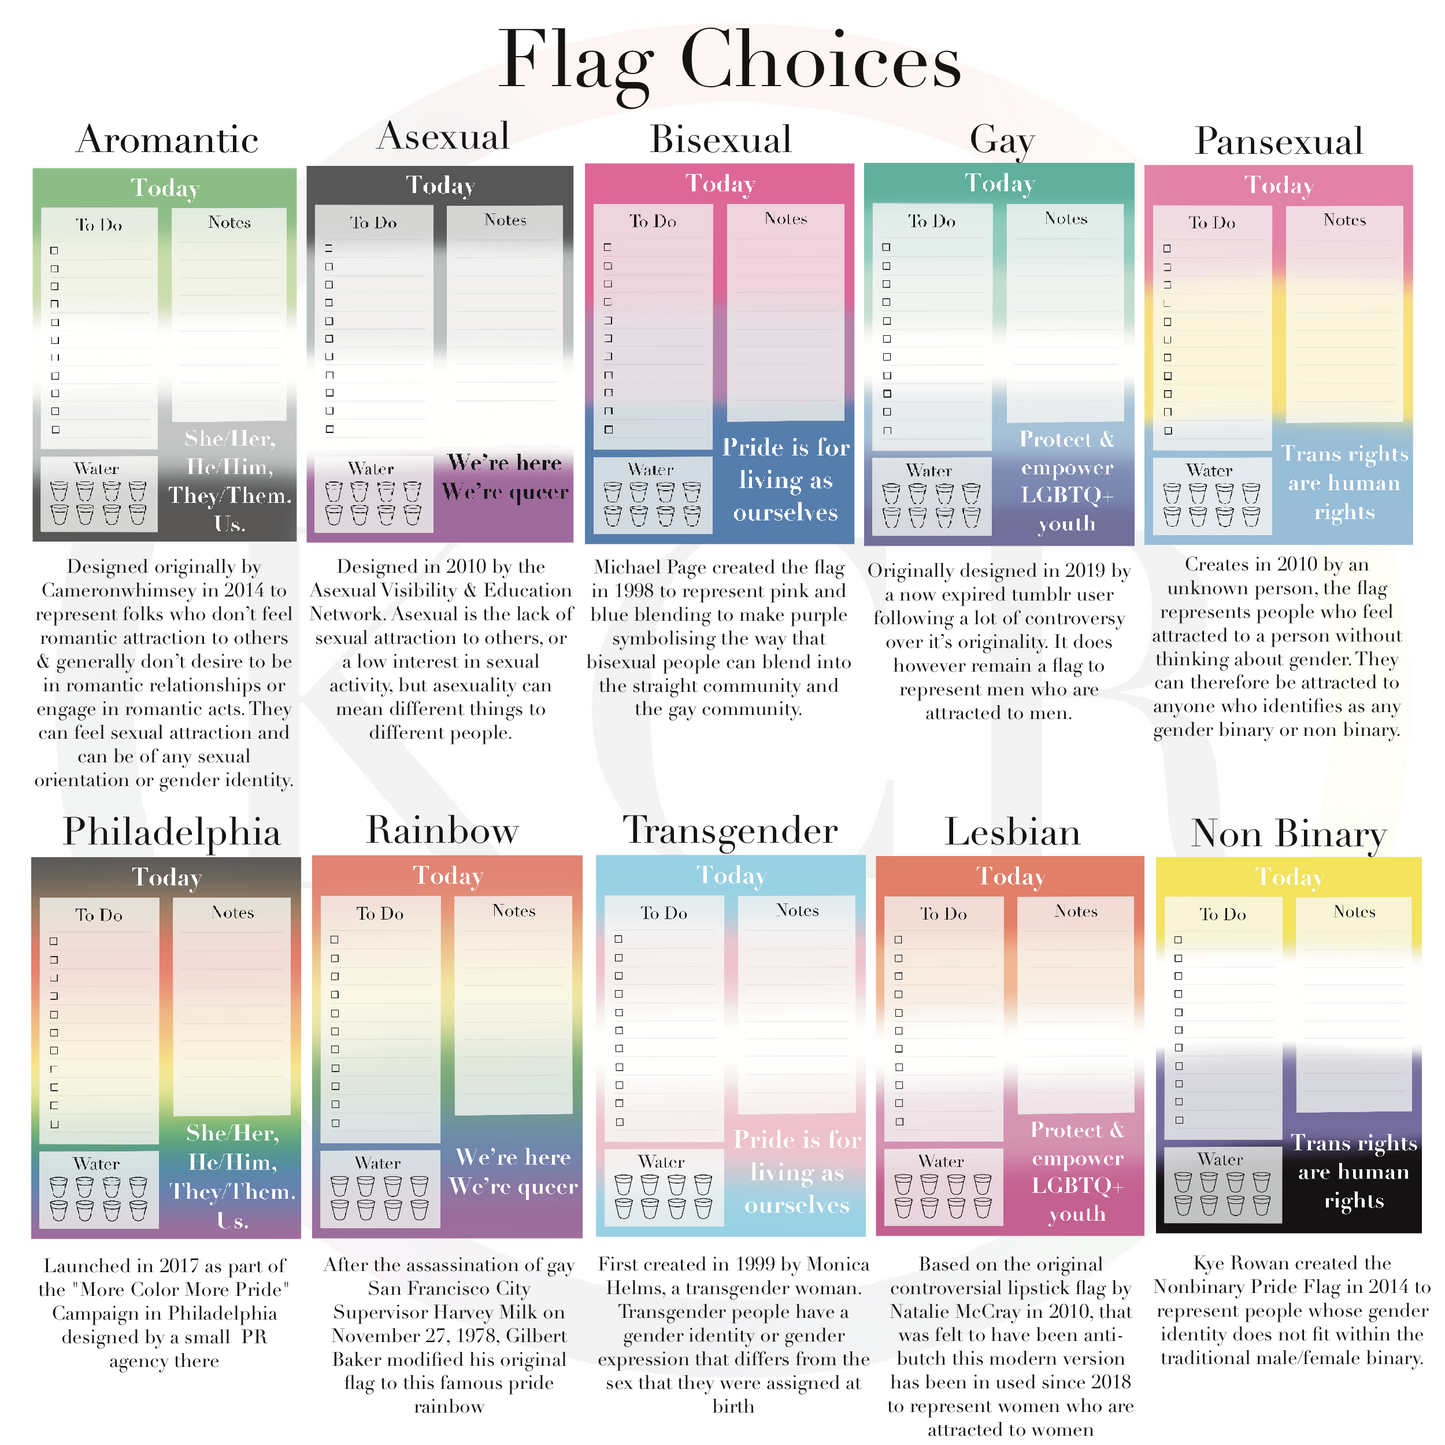 Pride flag meanings reference sheet showing 10 flag colours and text underneath each detailing the meaning